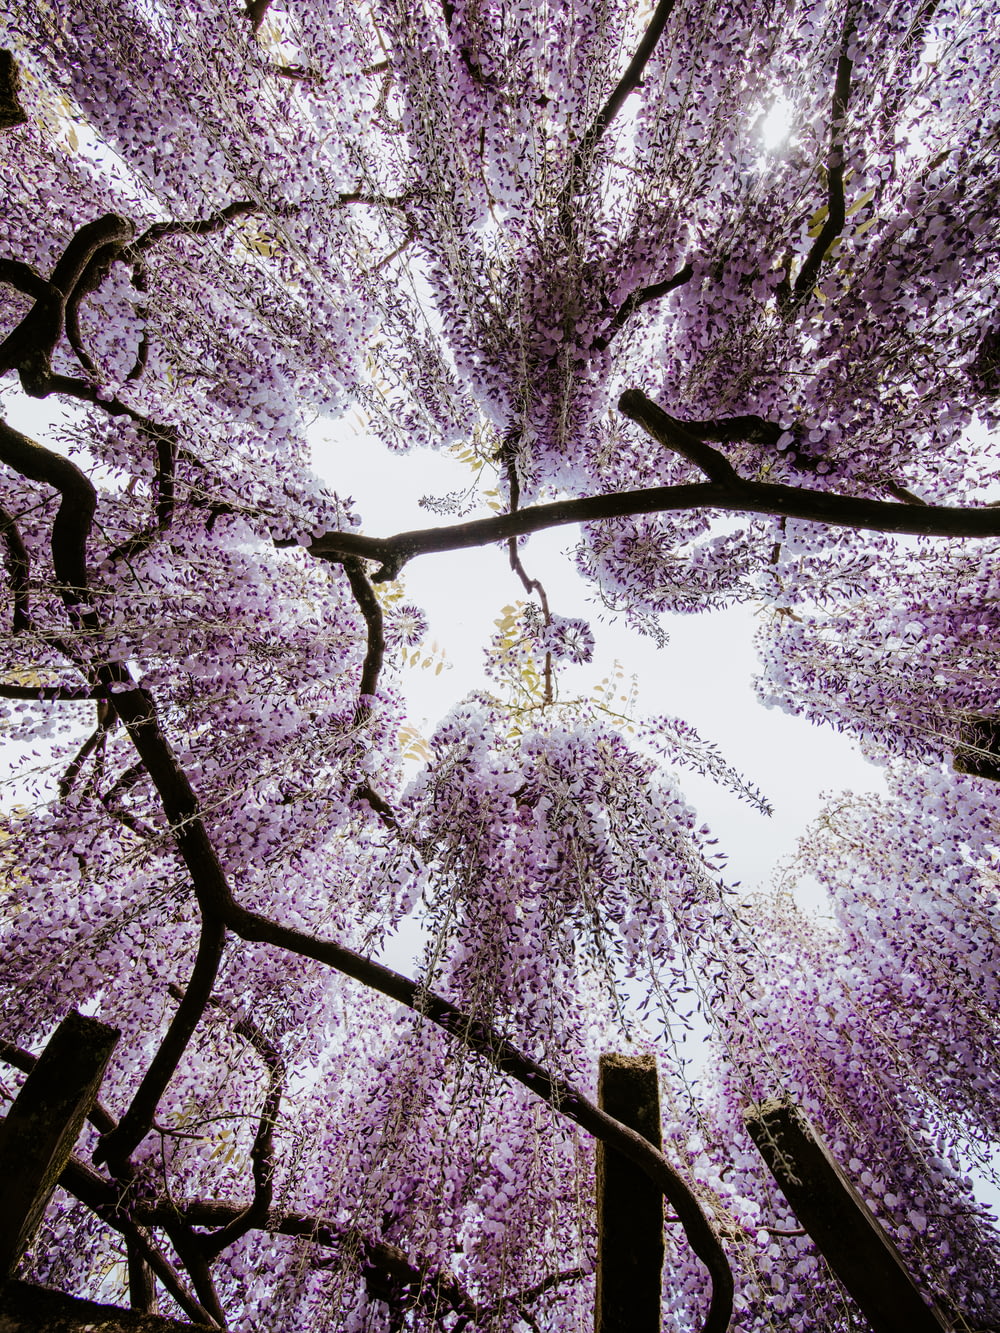 looking up at the canopy of a purple flowering tree